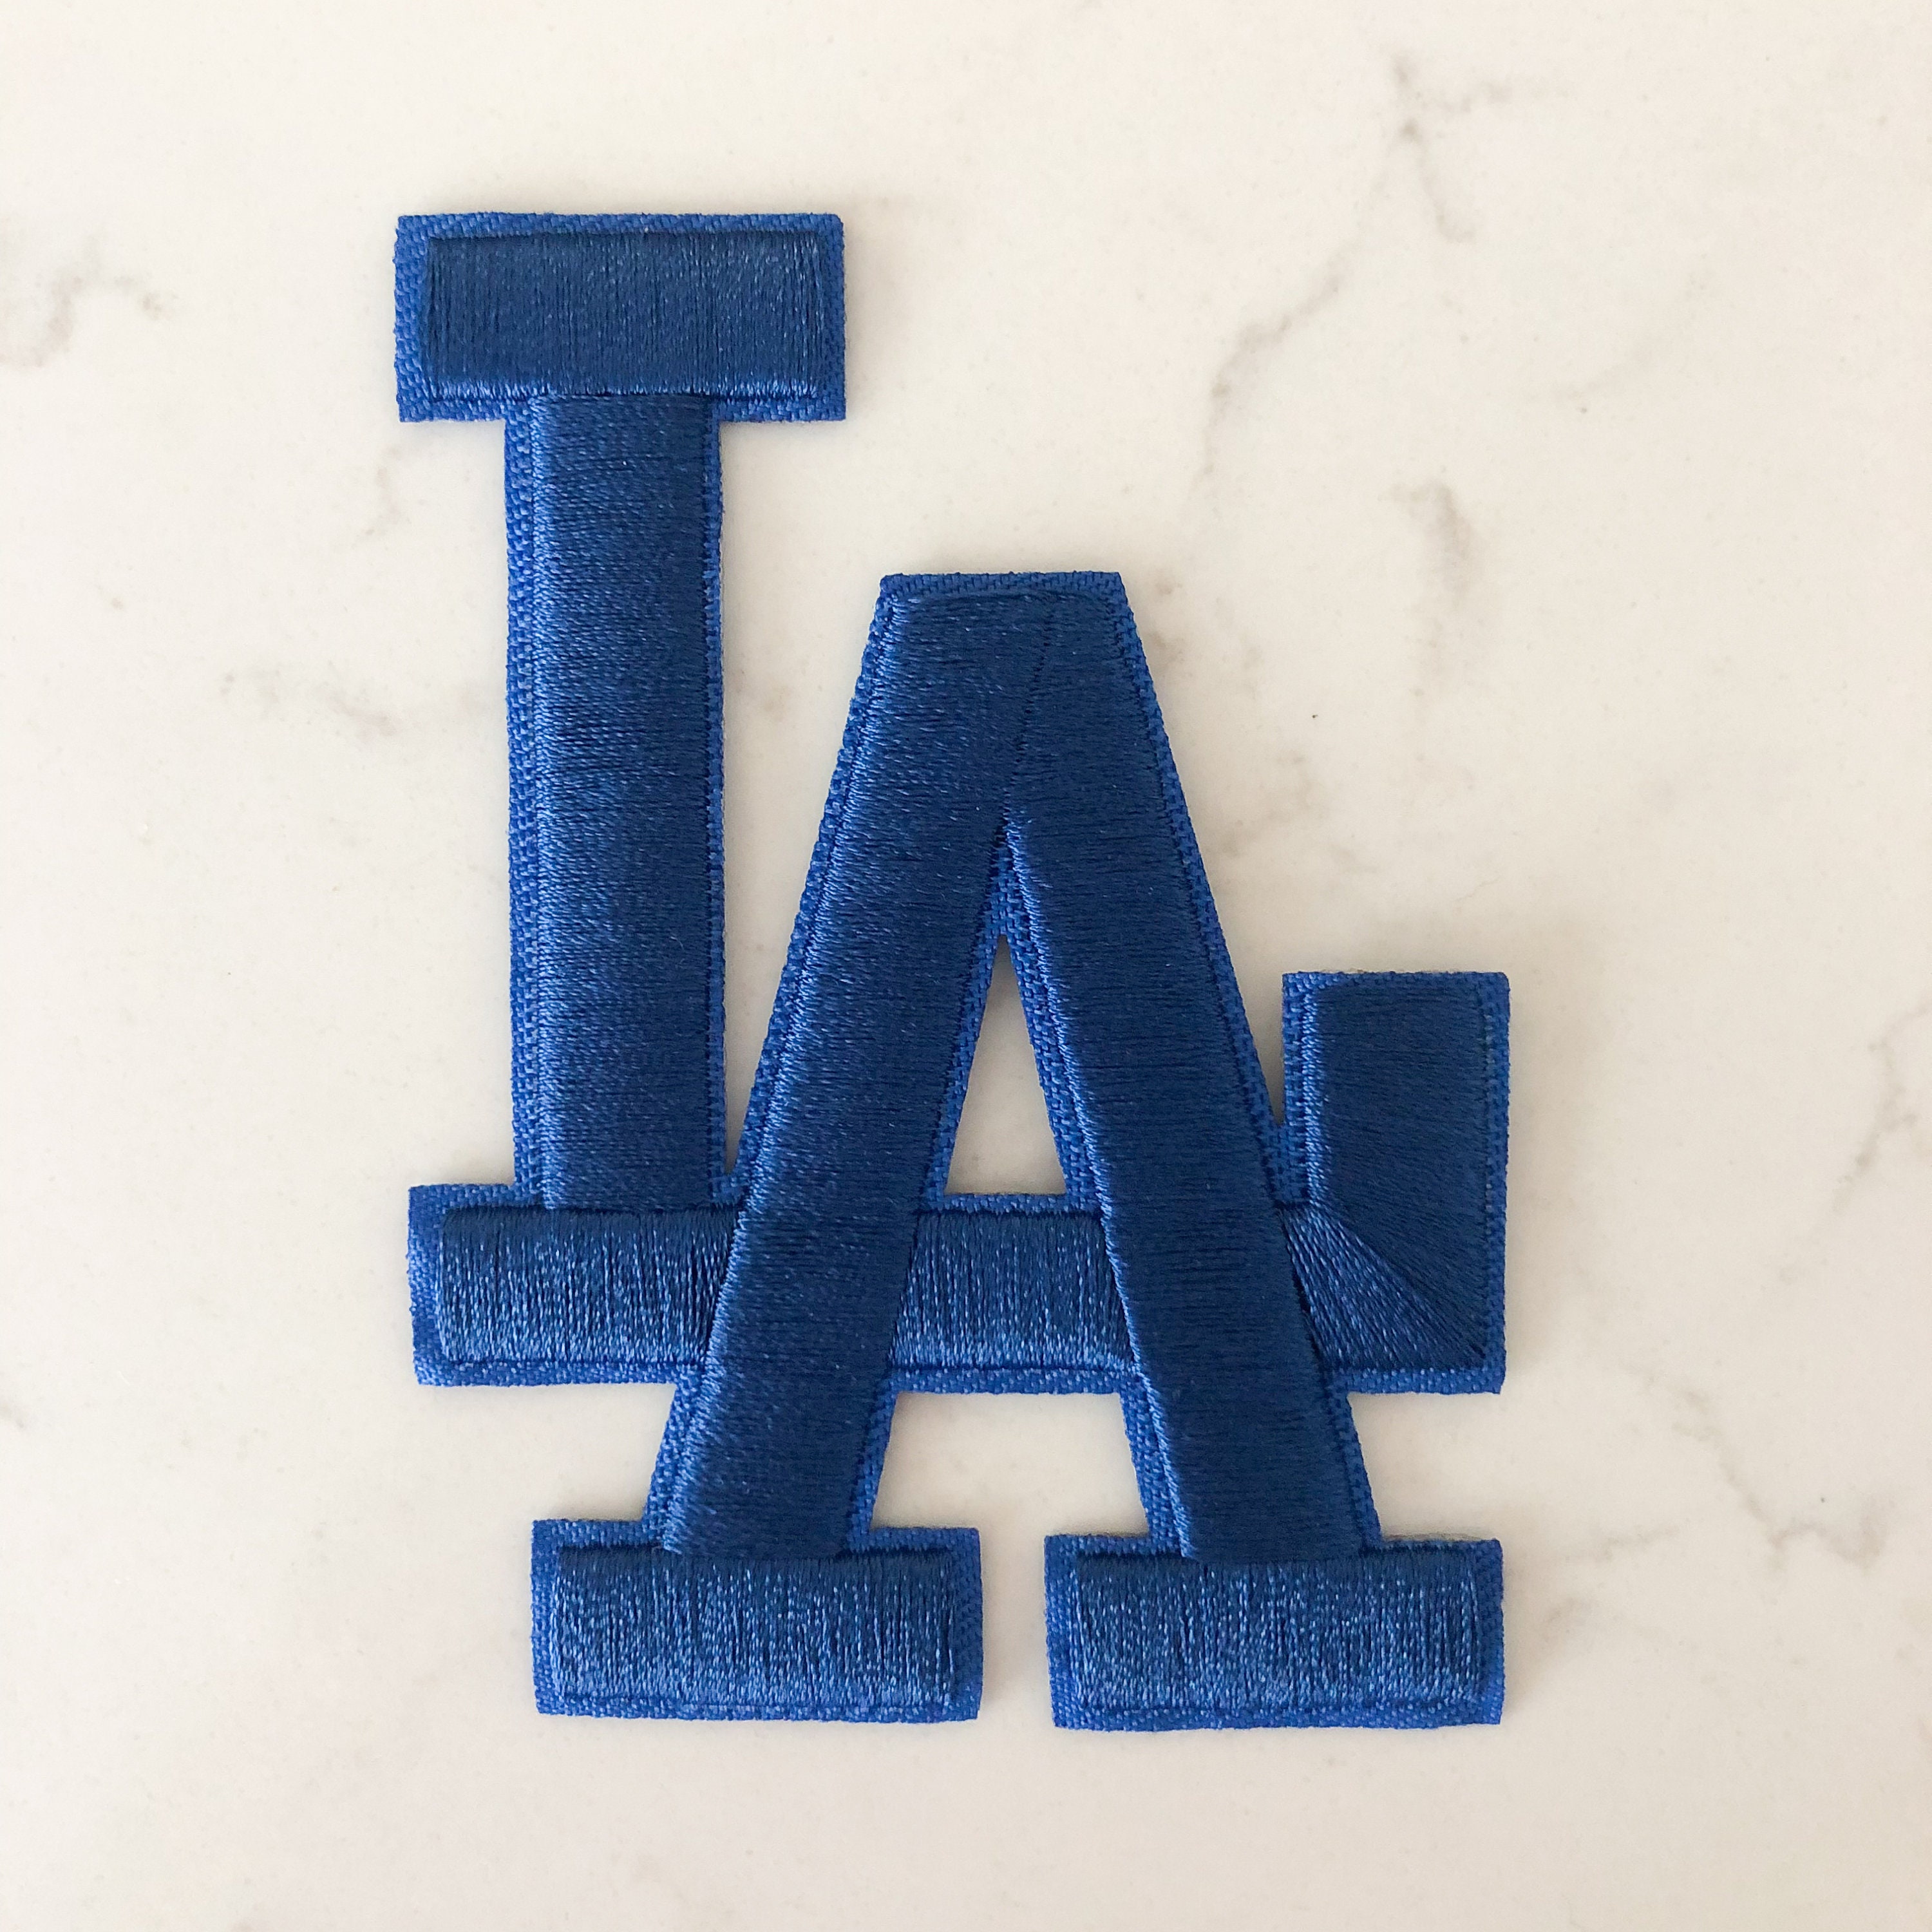 6 pieces "LA" Los Angeles Dodgers Embroidered Iron On Patch. 